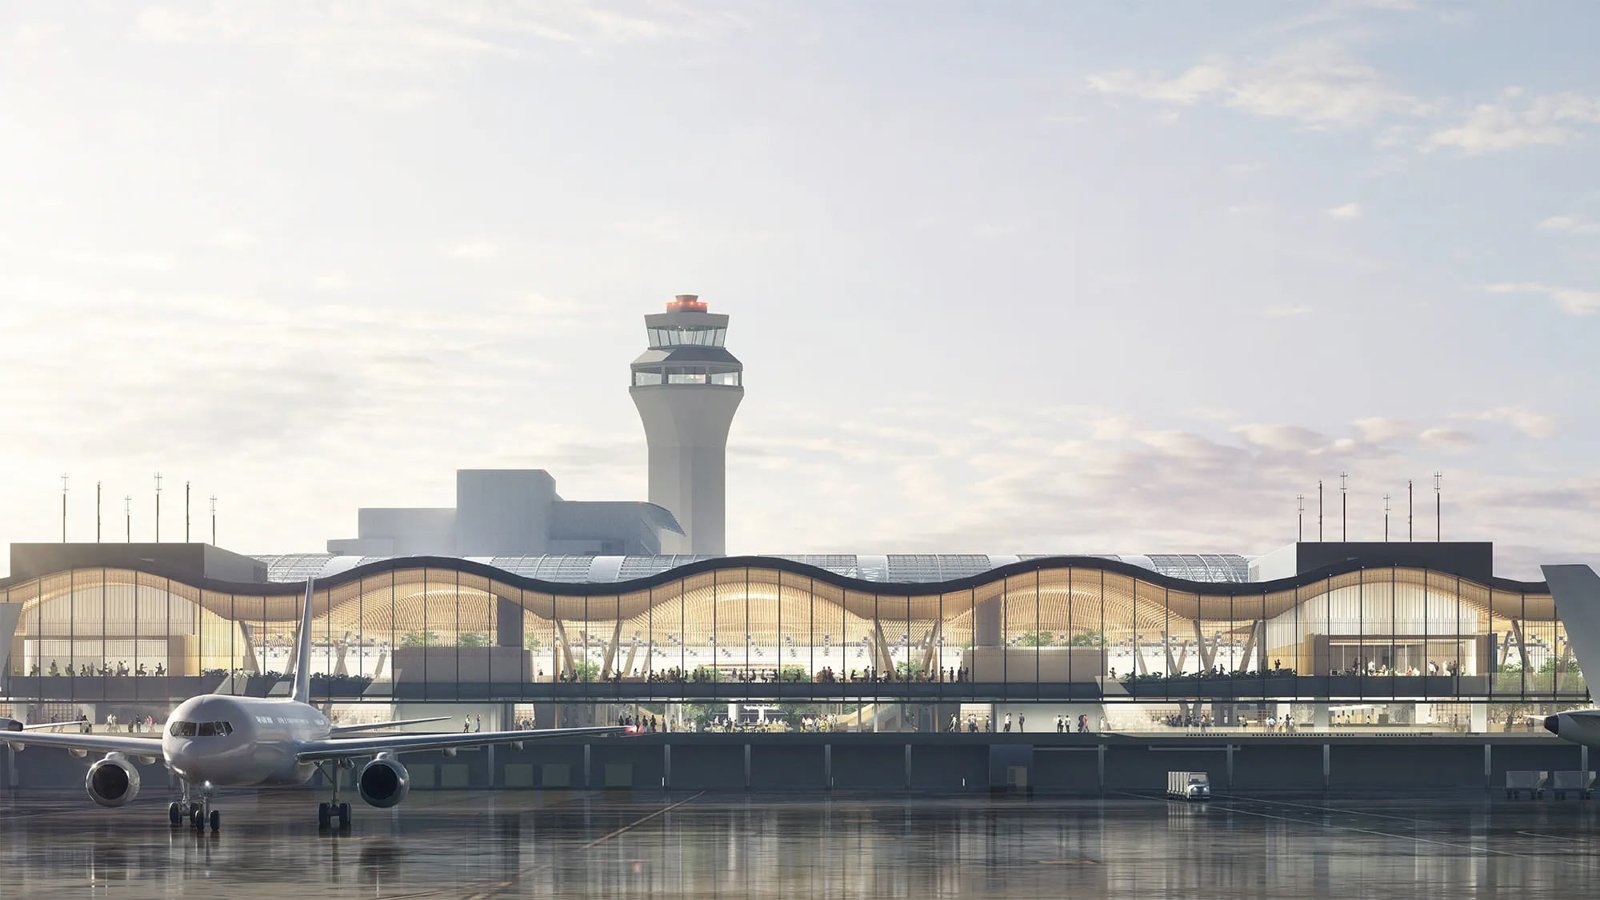 External CGI of the new airport